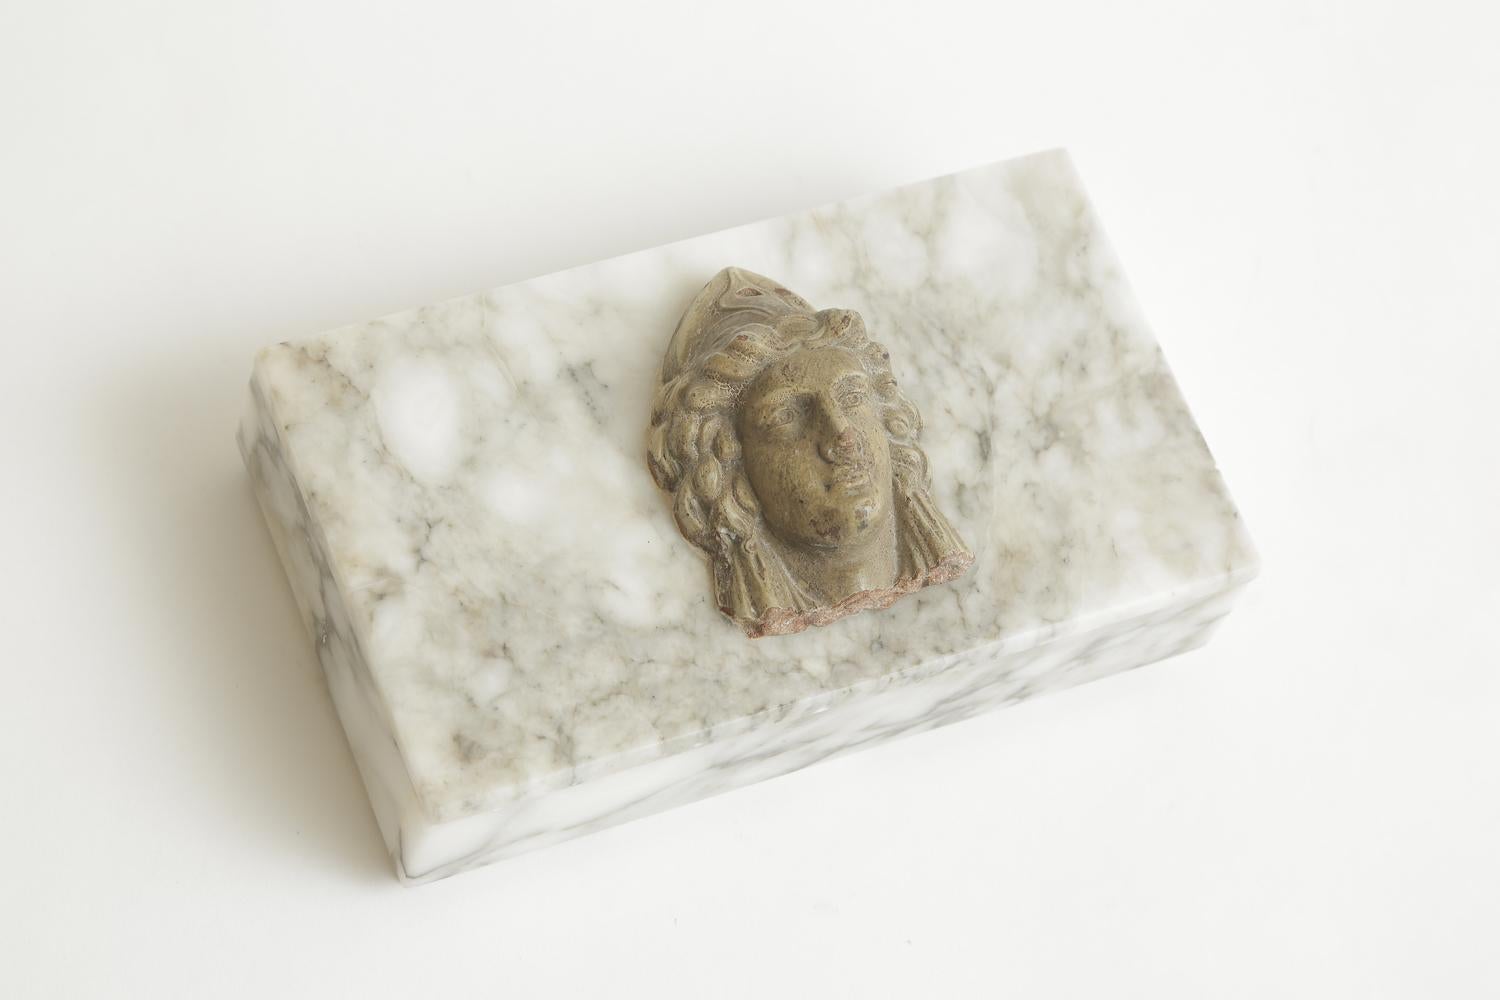 This lovely and vintage Italian marble 2 part box has a classical revival medallion head on top made out of a composition material. The marble box was cleaned and polished just recently to the best it can be now. There are no chips. This box is from